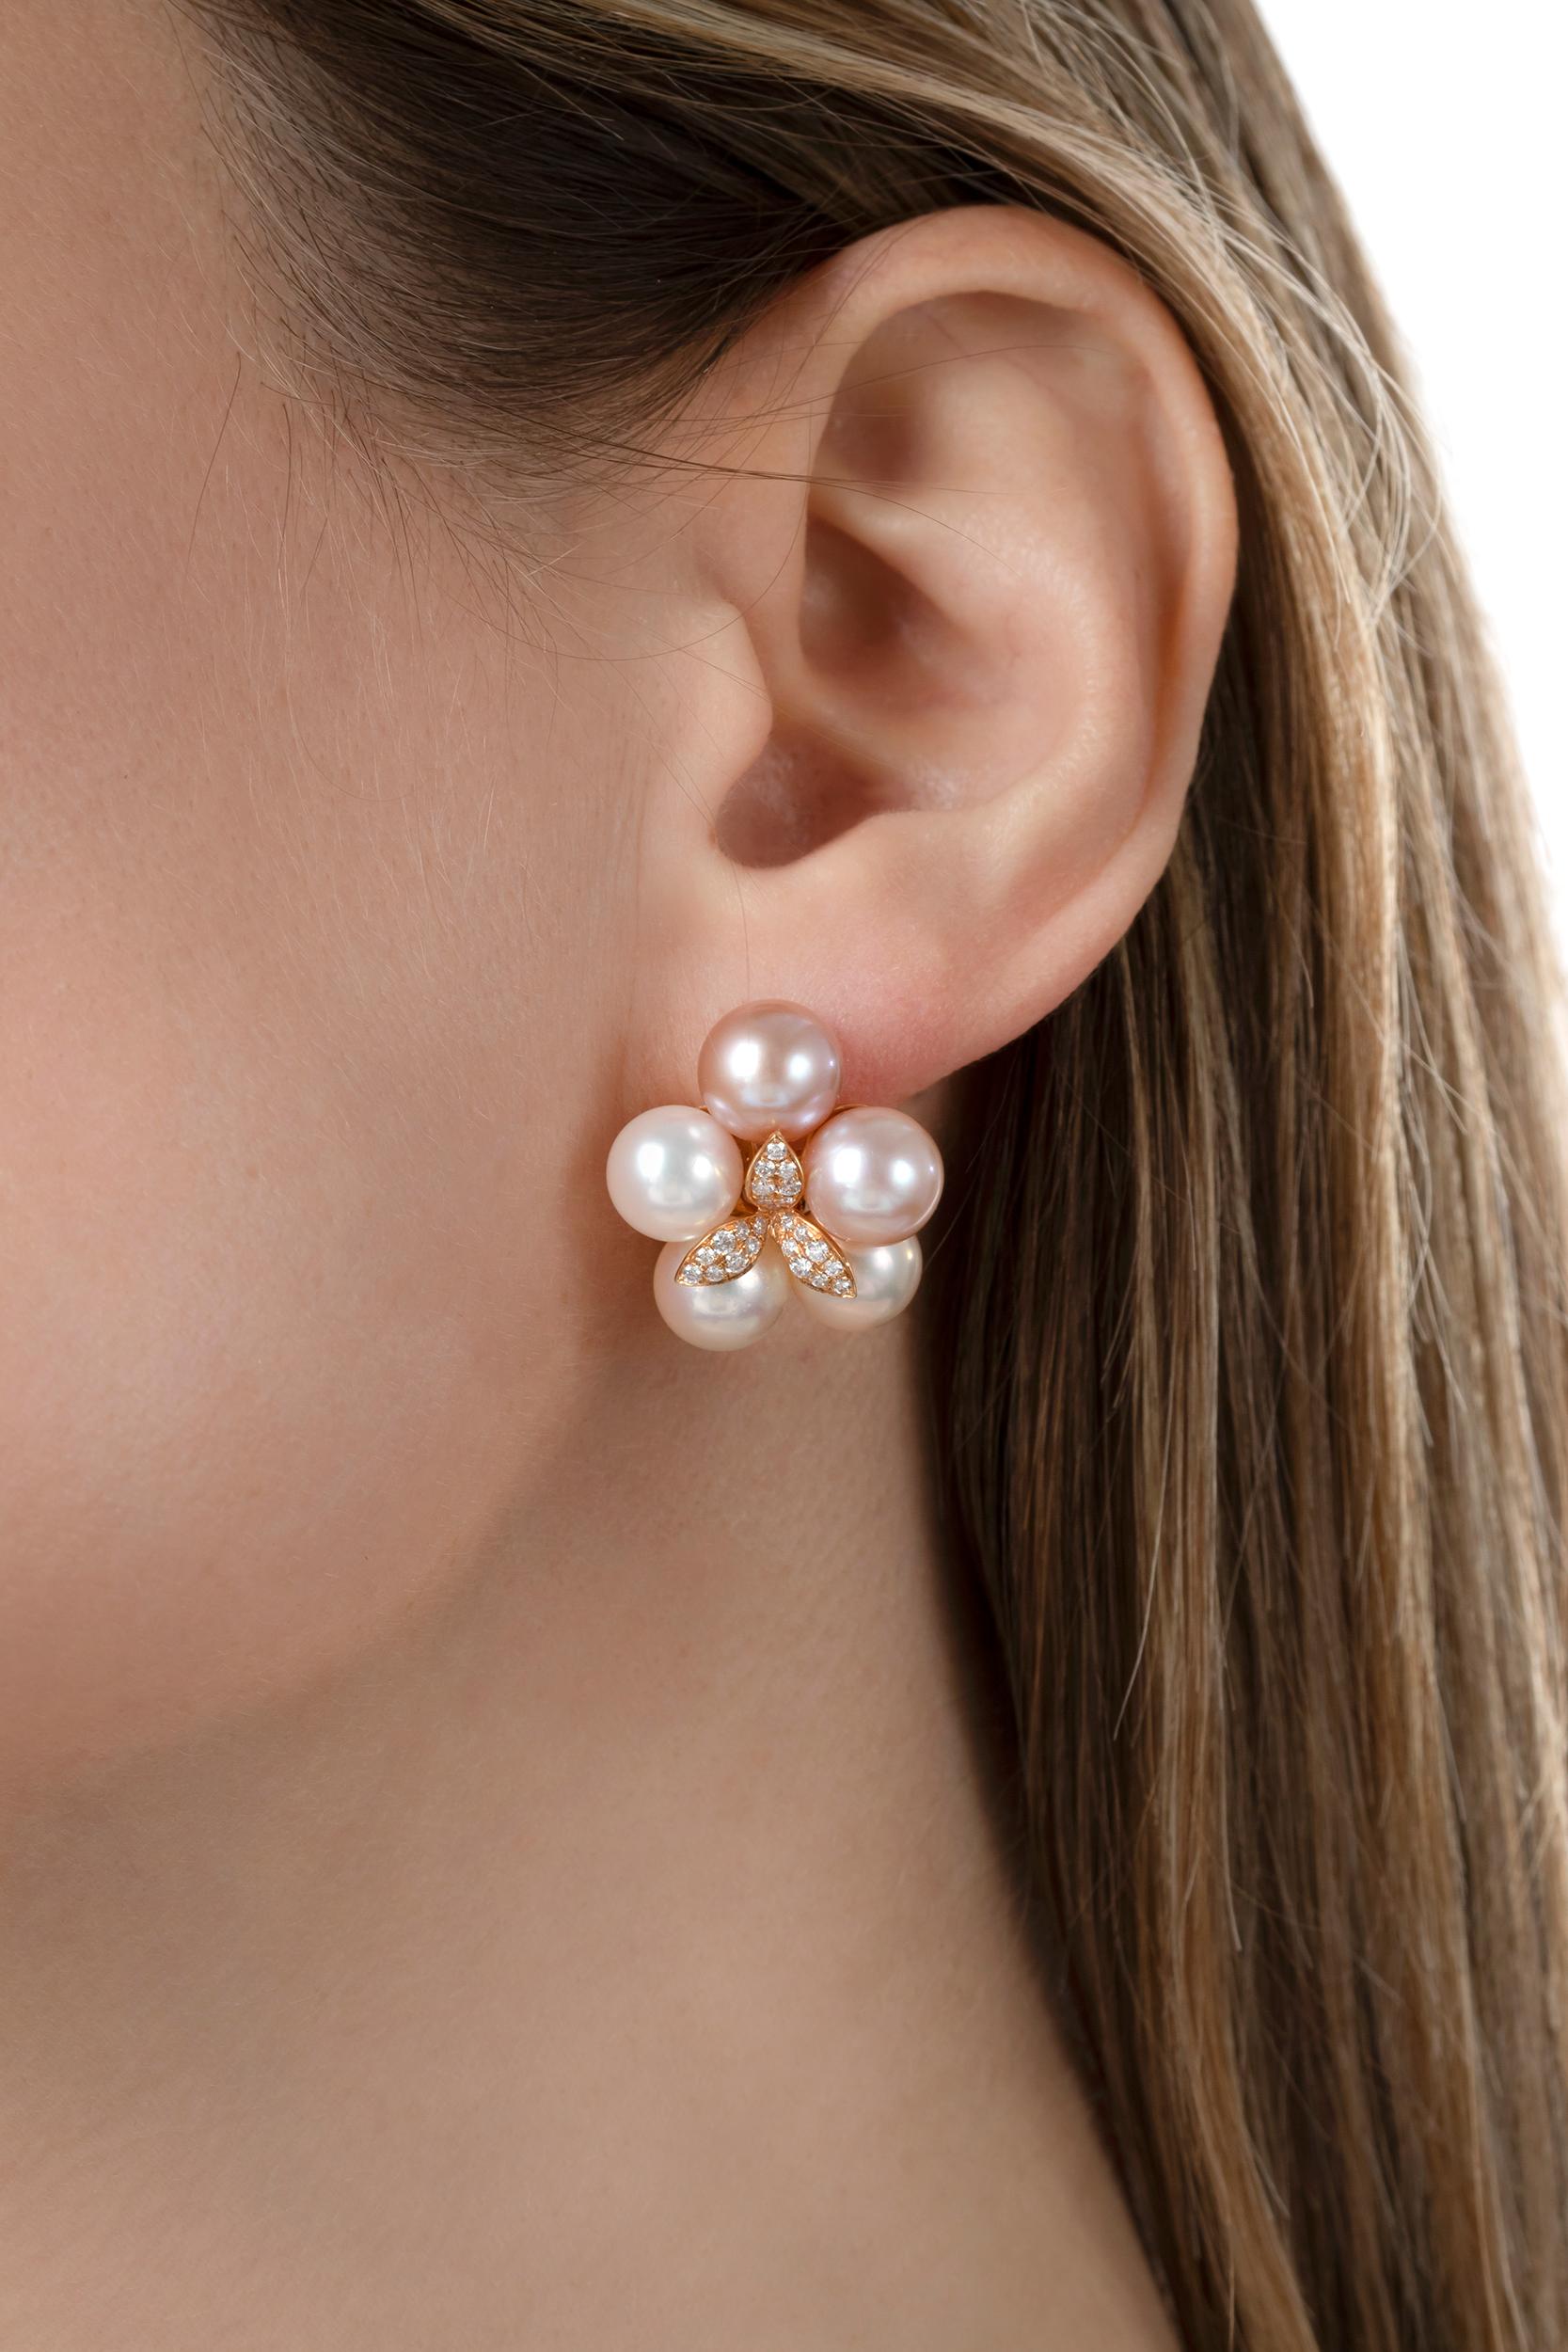 Beautiful earrings from Yoko London featuring a delicate colour palette of pink and white pearls, perfectly formed into a flower-shaped cluster and enhanced by diamond-set 18K Rose Gold. Style these earrings with sleek outfits for a perfectly